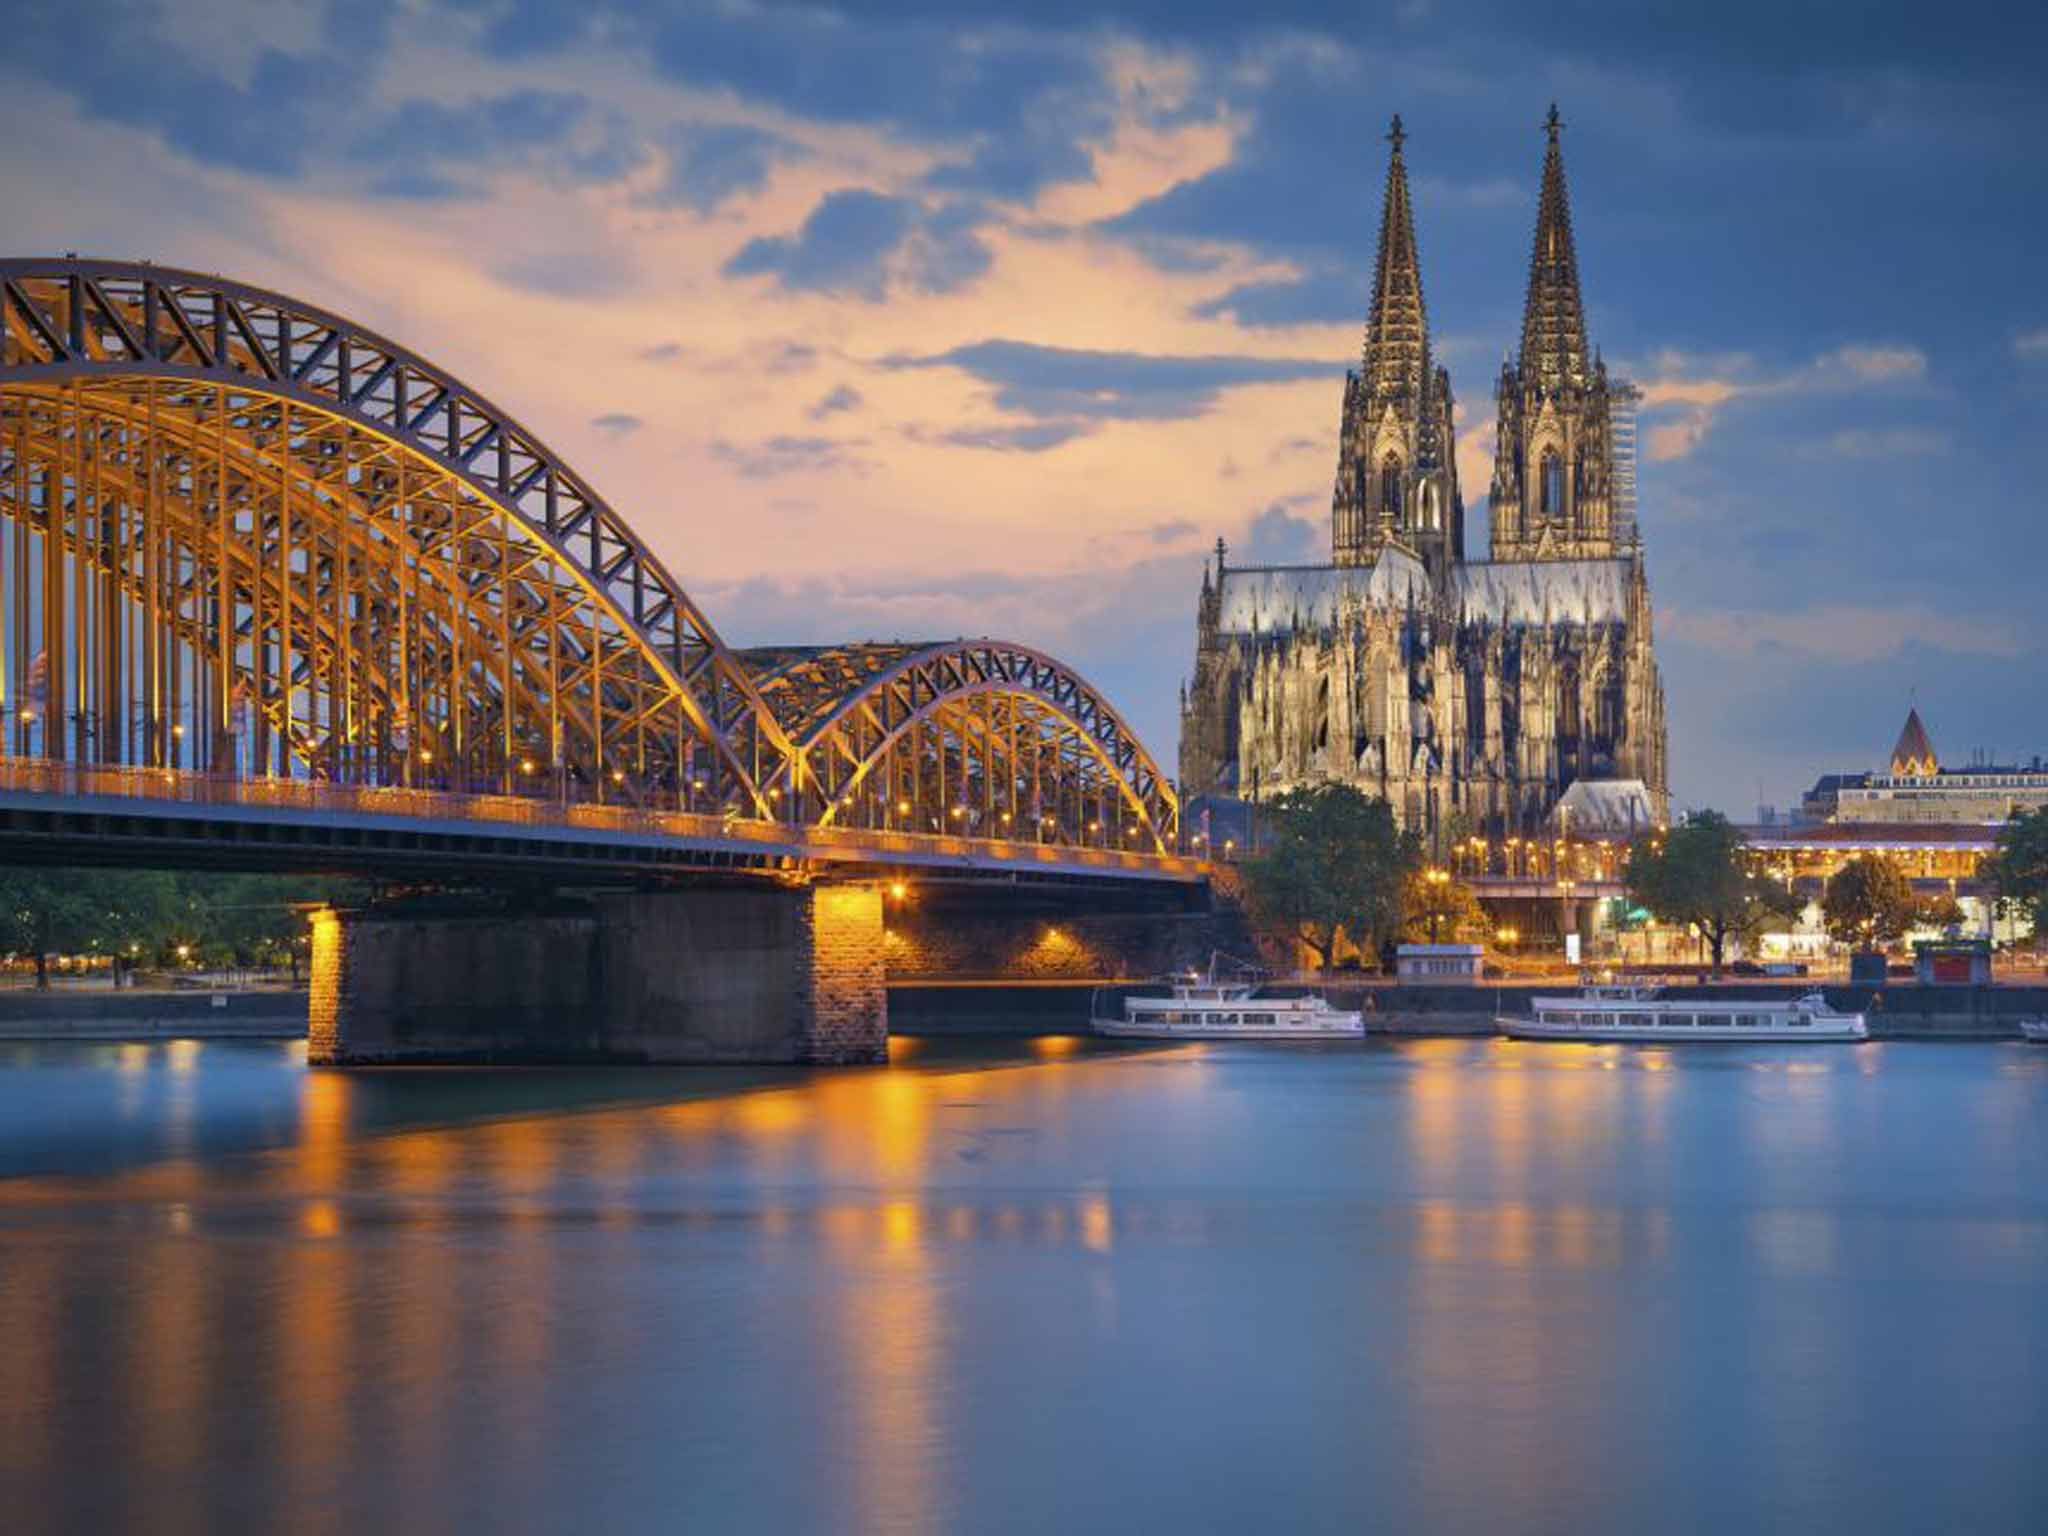 Make tracks: the railway bridge crosses the Rhine near the cathedral in Cologne